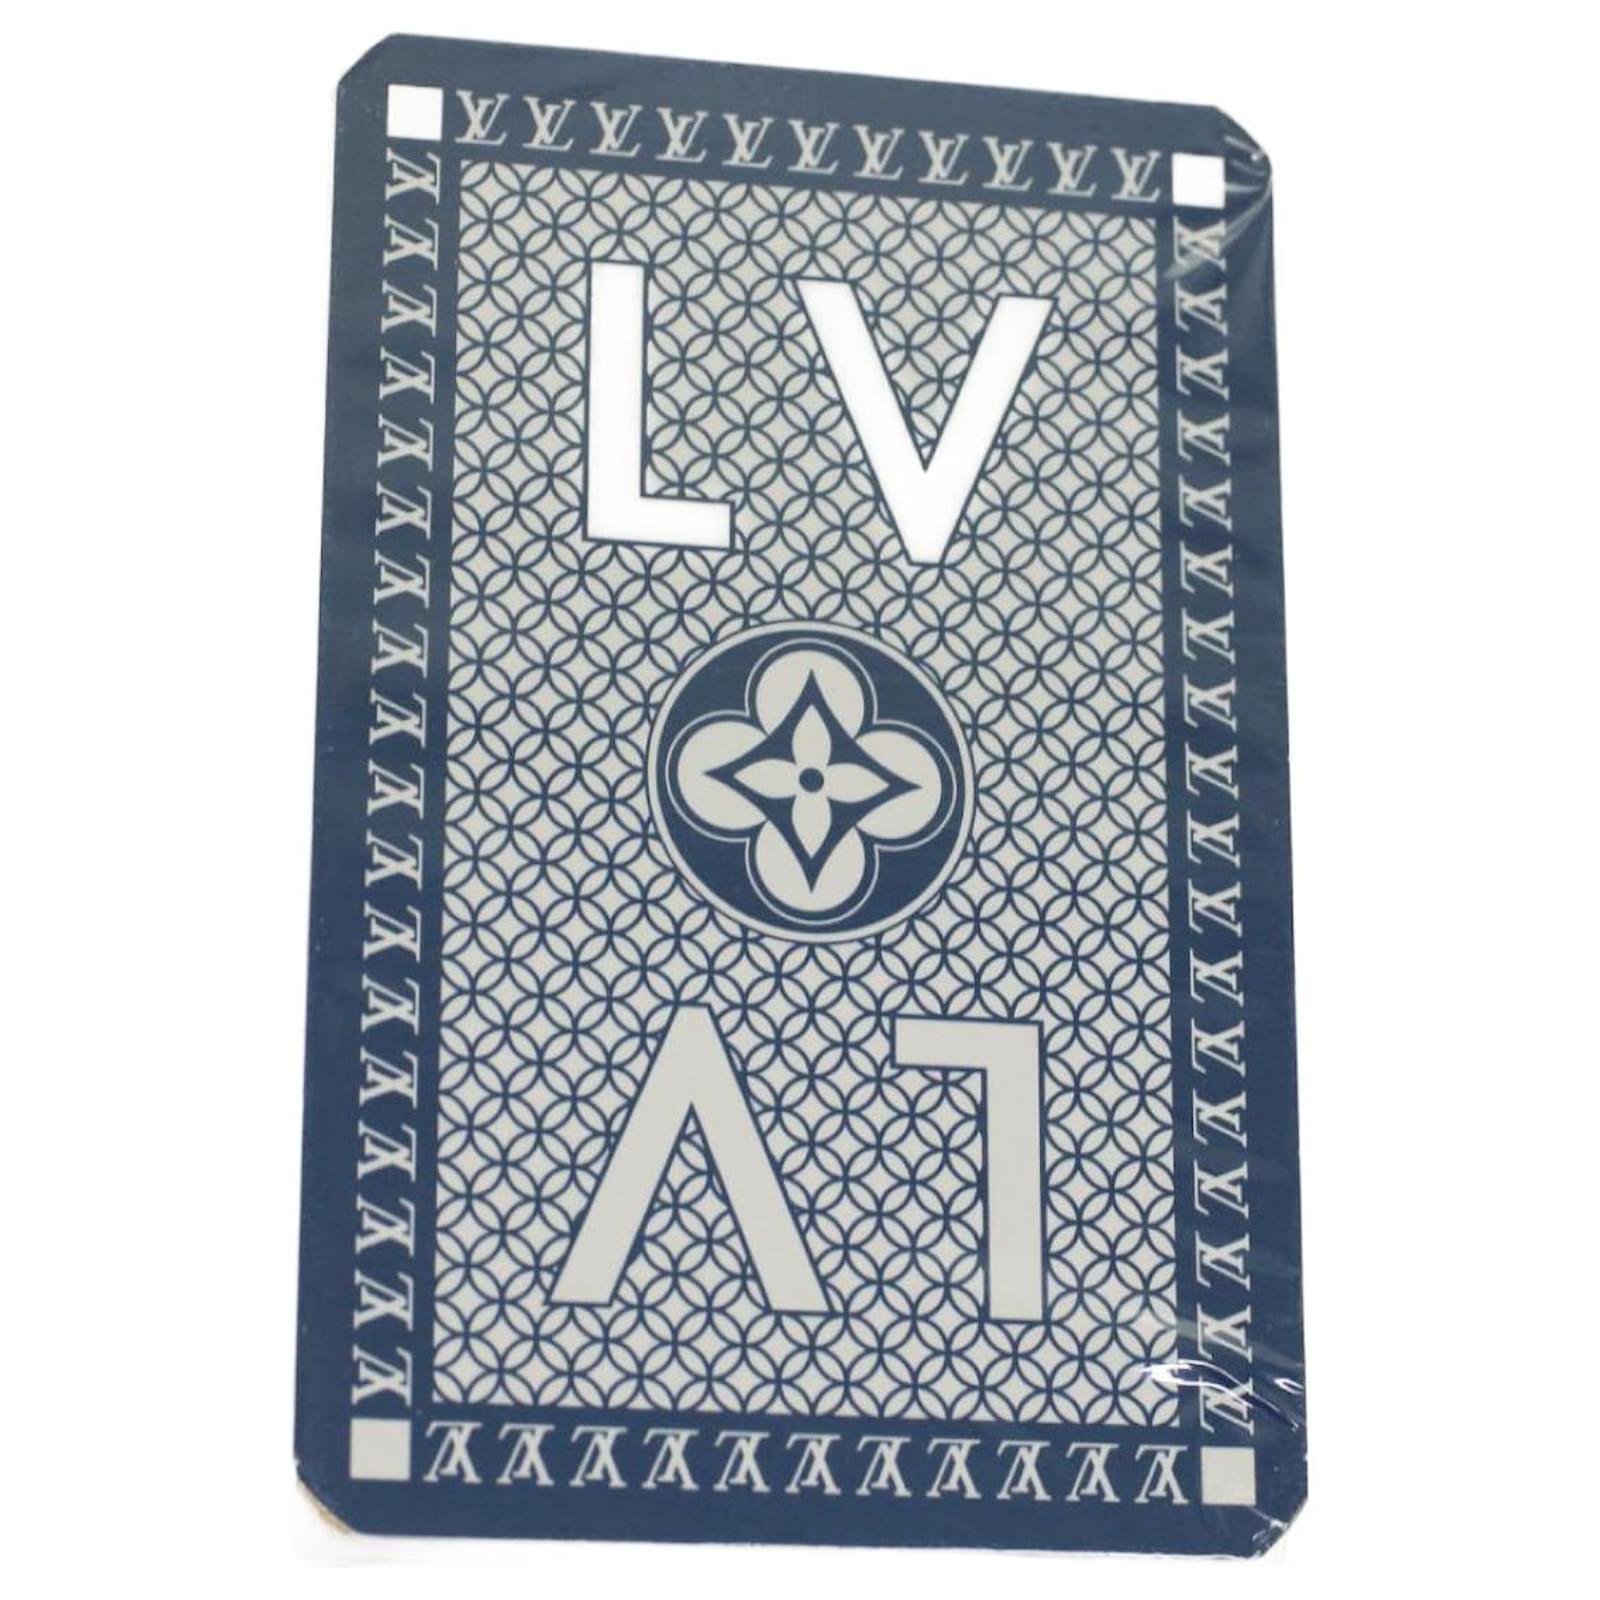 lv playing cards